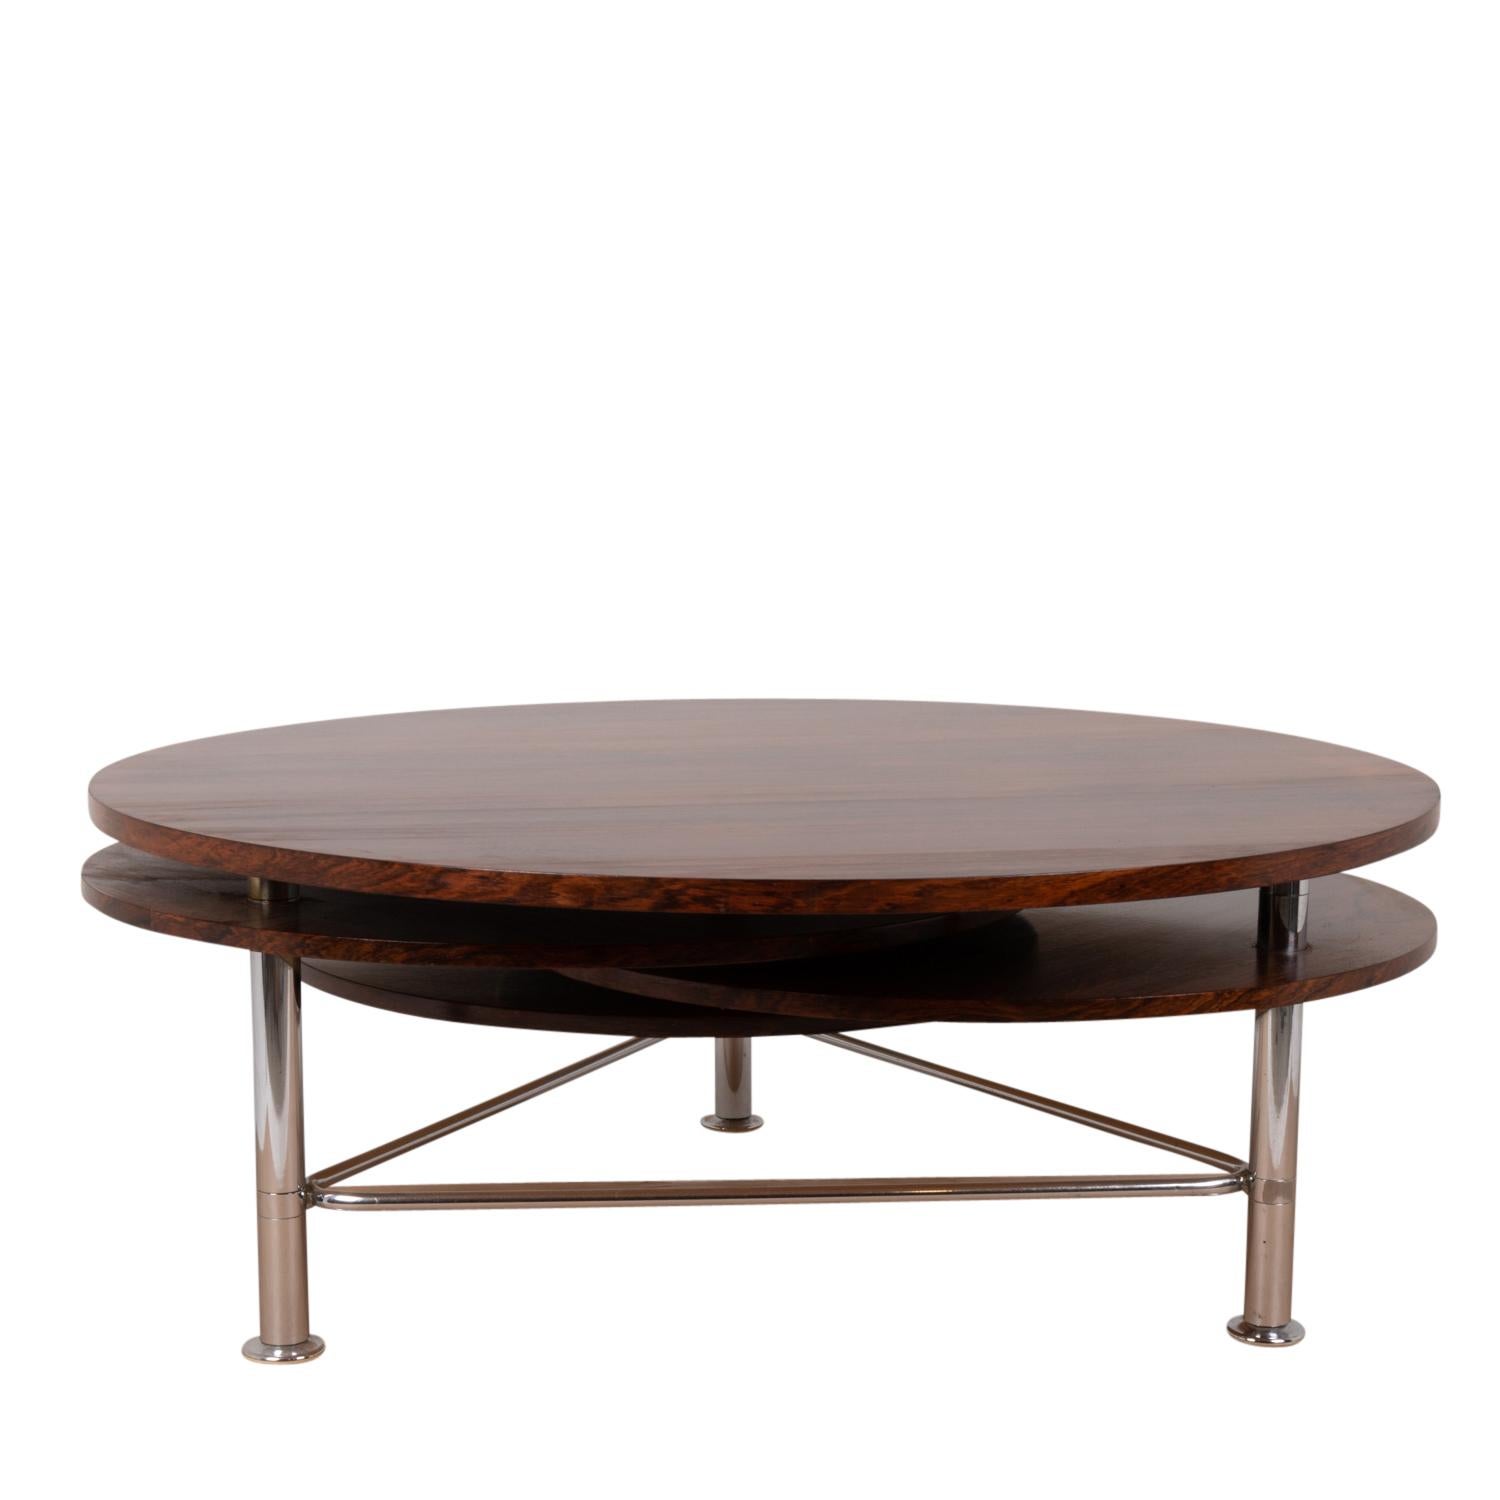 Coffee table in rosewood, consisting of four circular pivoting trays. Base in chromed metal.

Dutch work realized in the 1970s.

Dimensions: H 43 x D minimum 110 / maximum 220 cm.